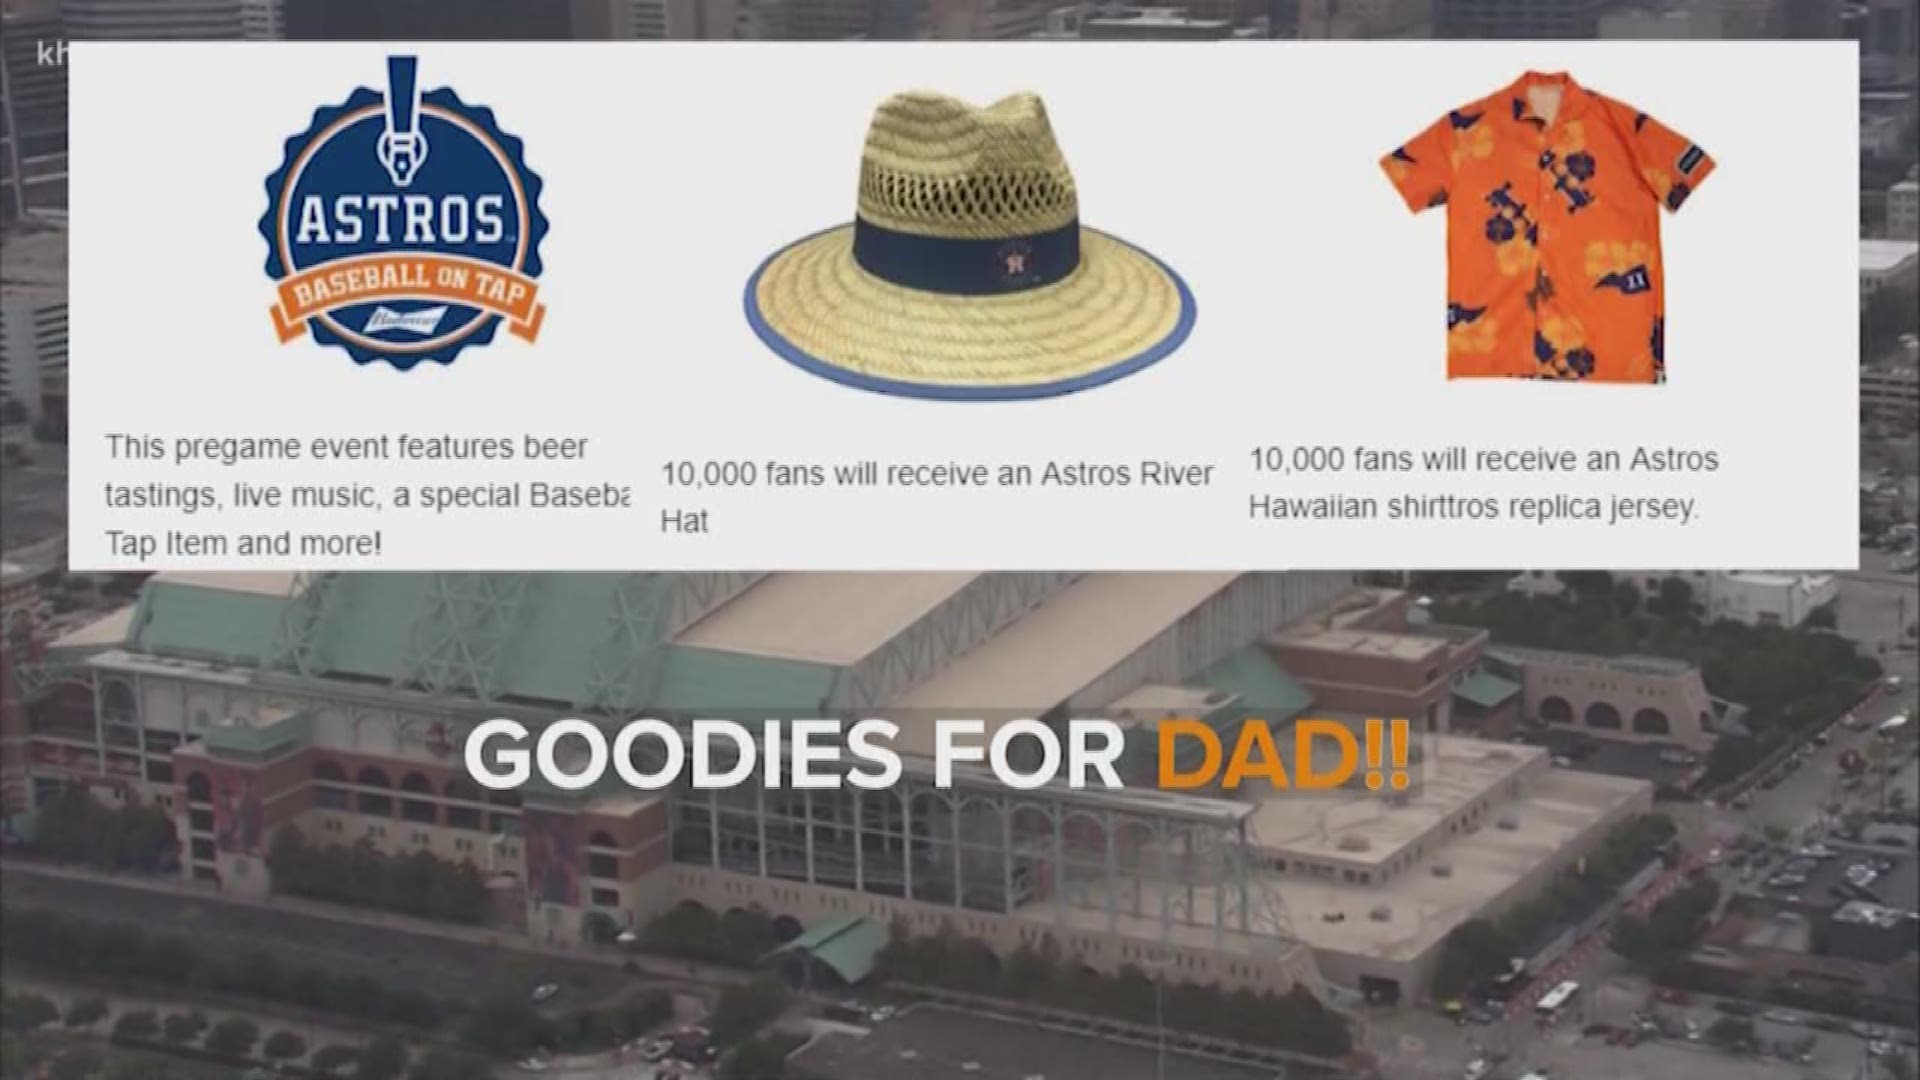 Minute Maid Park is one of the best ballparks in America, according to Seat Geek. The team has Father's Day giveaways Friday night when they play the Toronto Blue Jays.